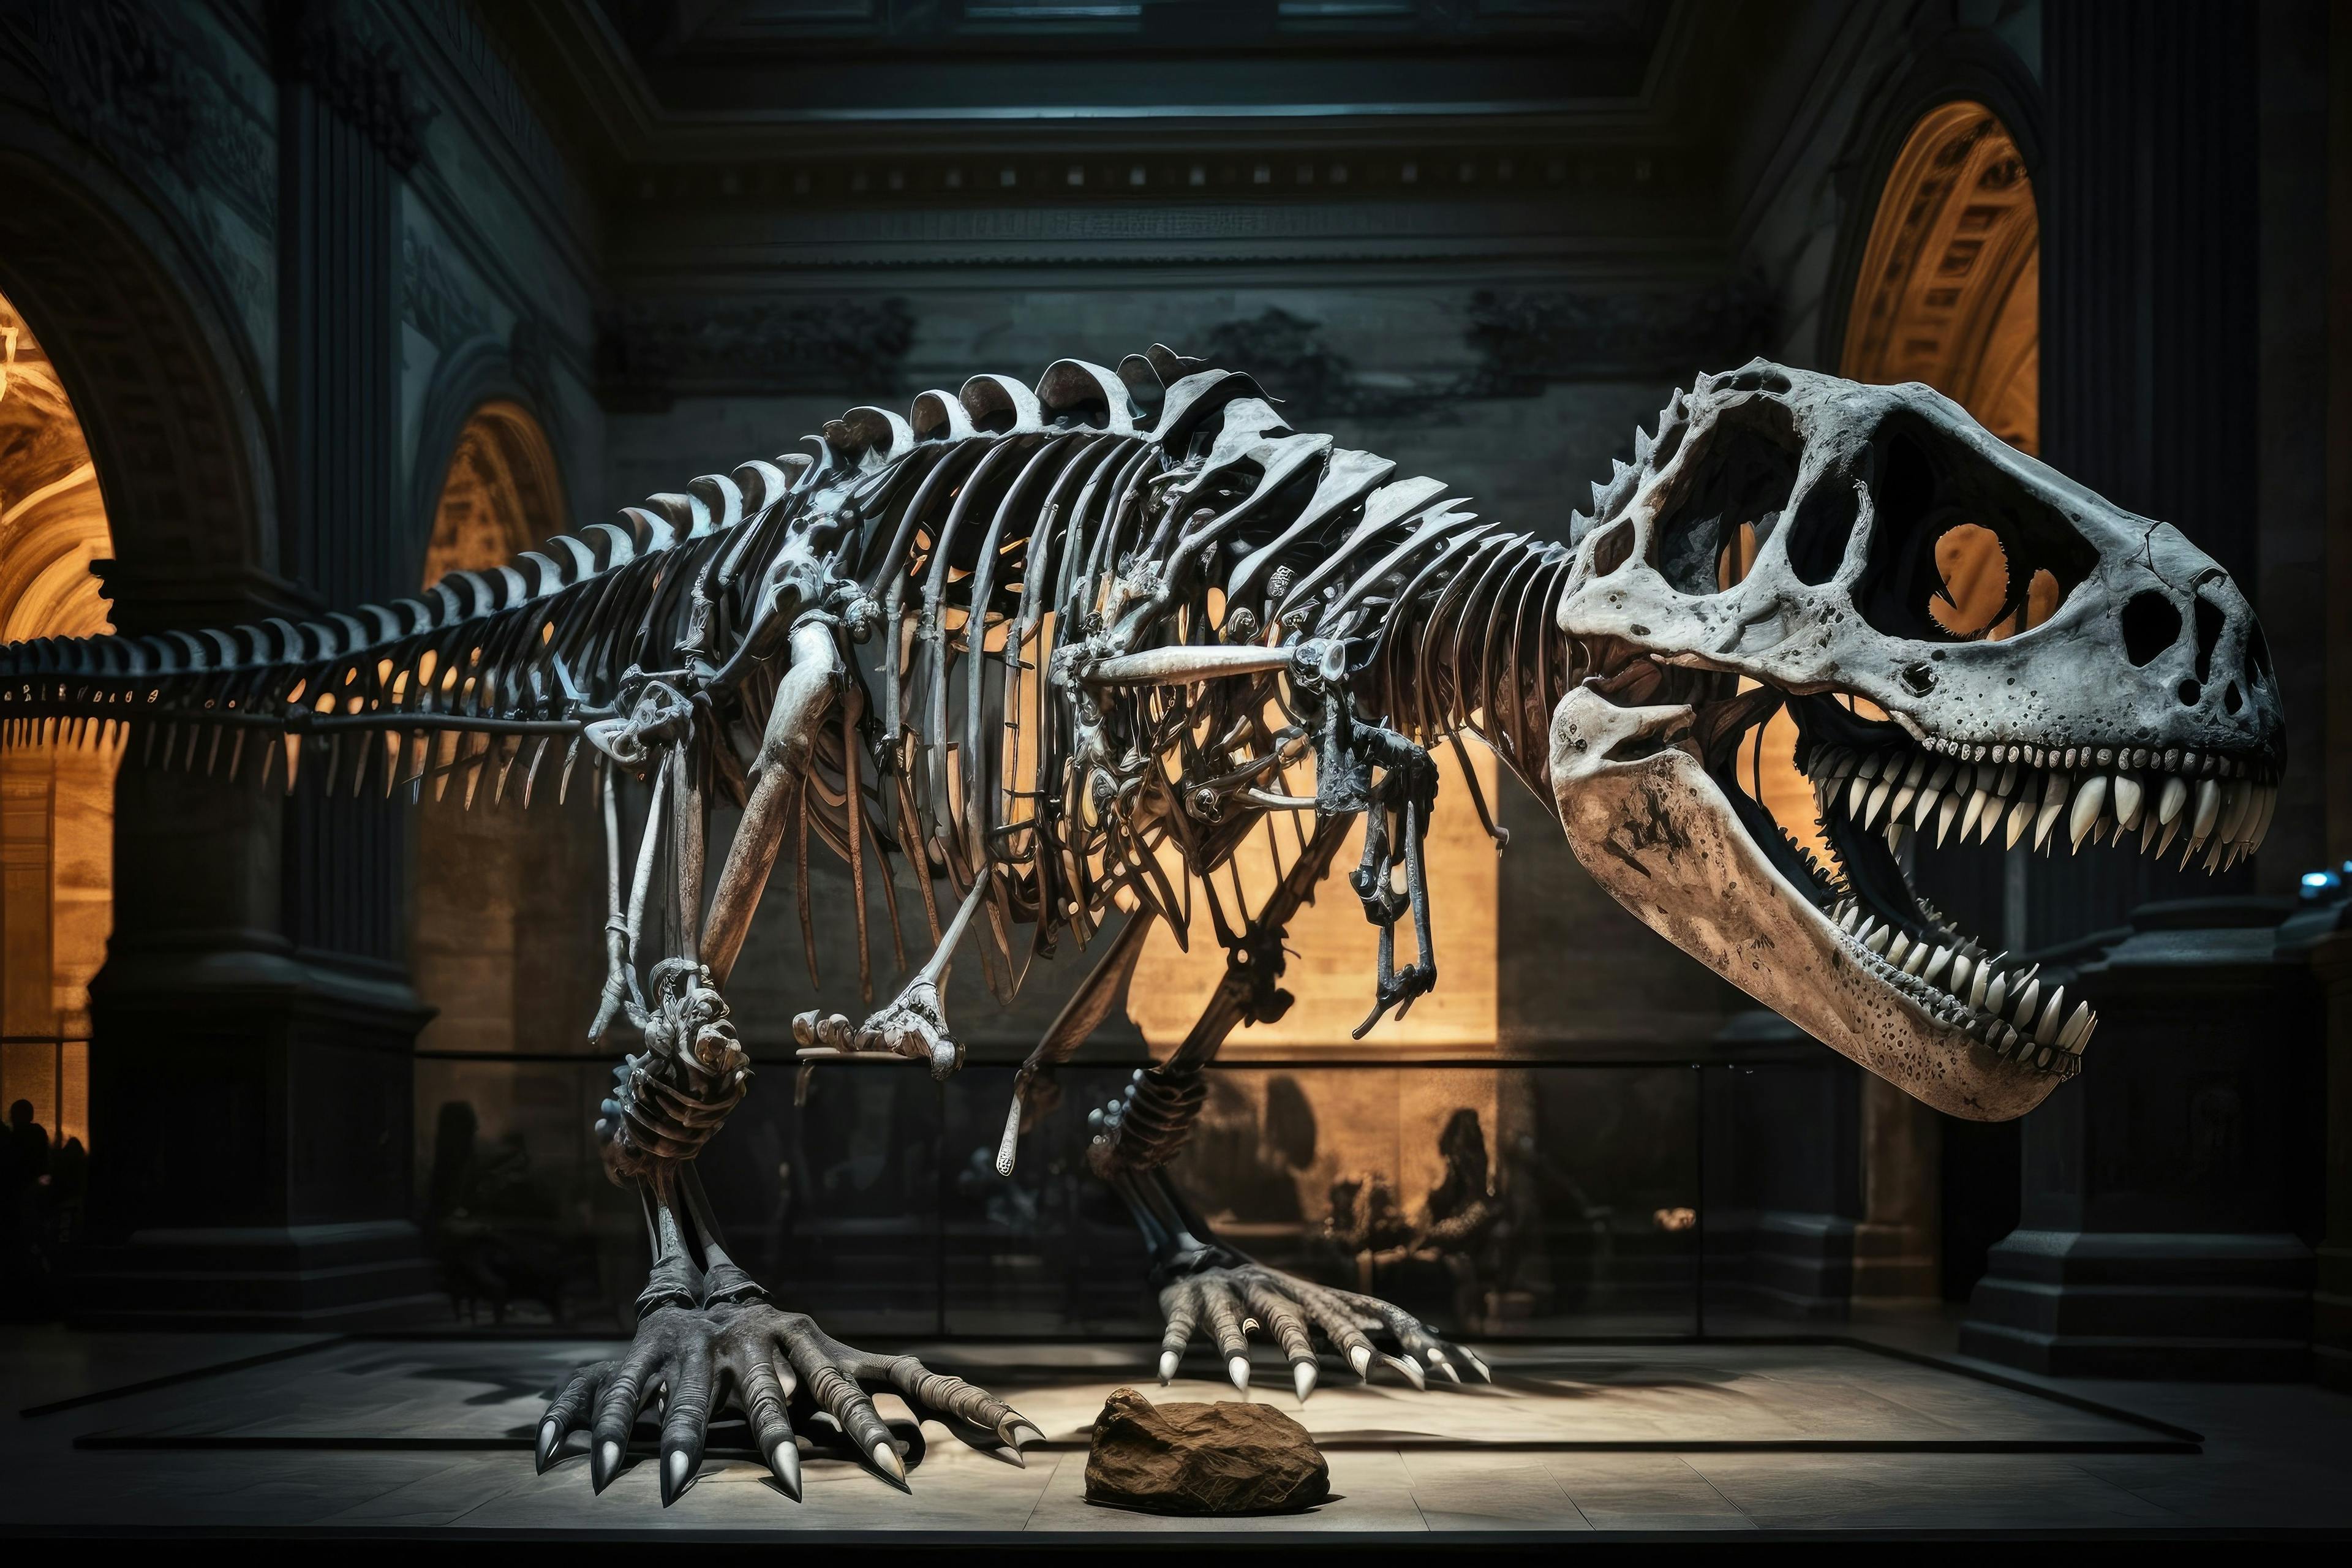 tyrannosaurus rex skeleton on display in museum, surrounded by scientific instruments and models, created with generative ai | Image Credit: © primopiano - stock.adobe.com 